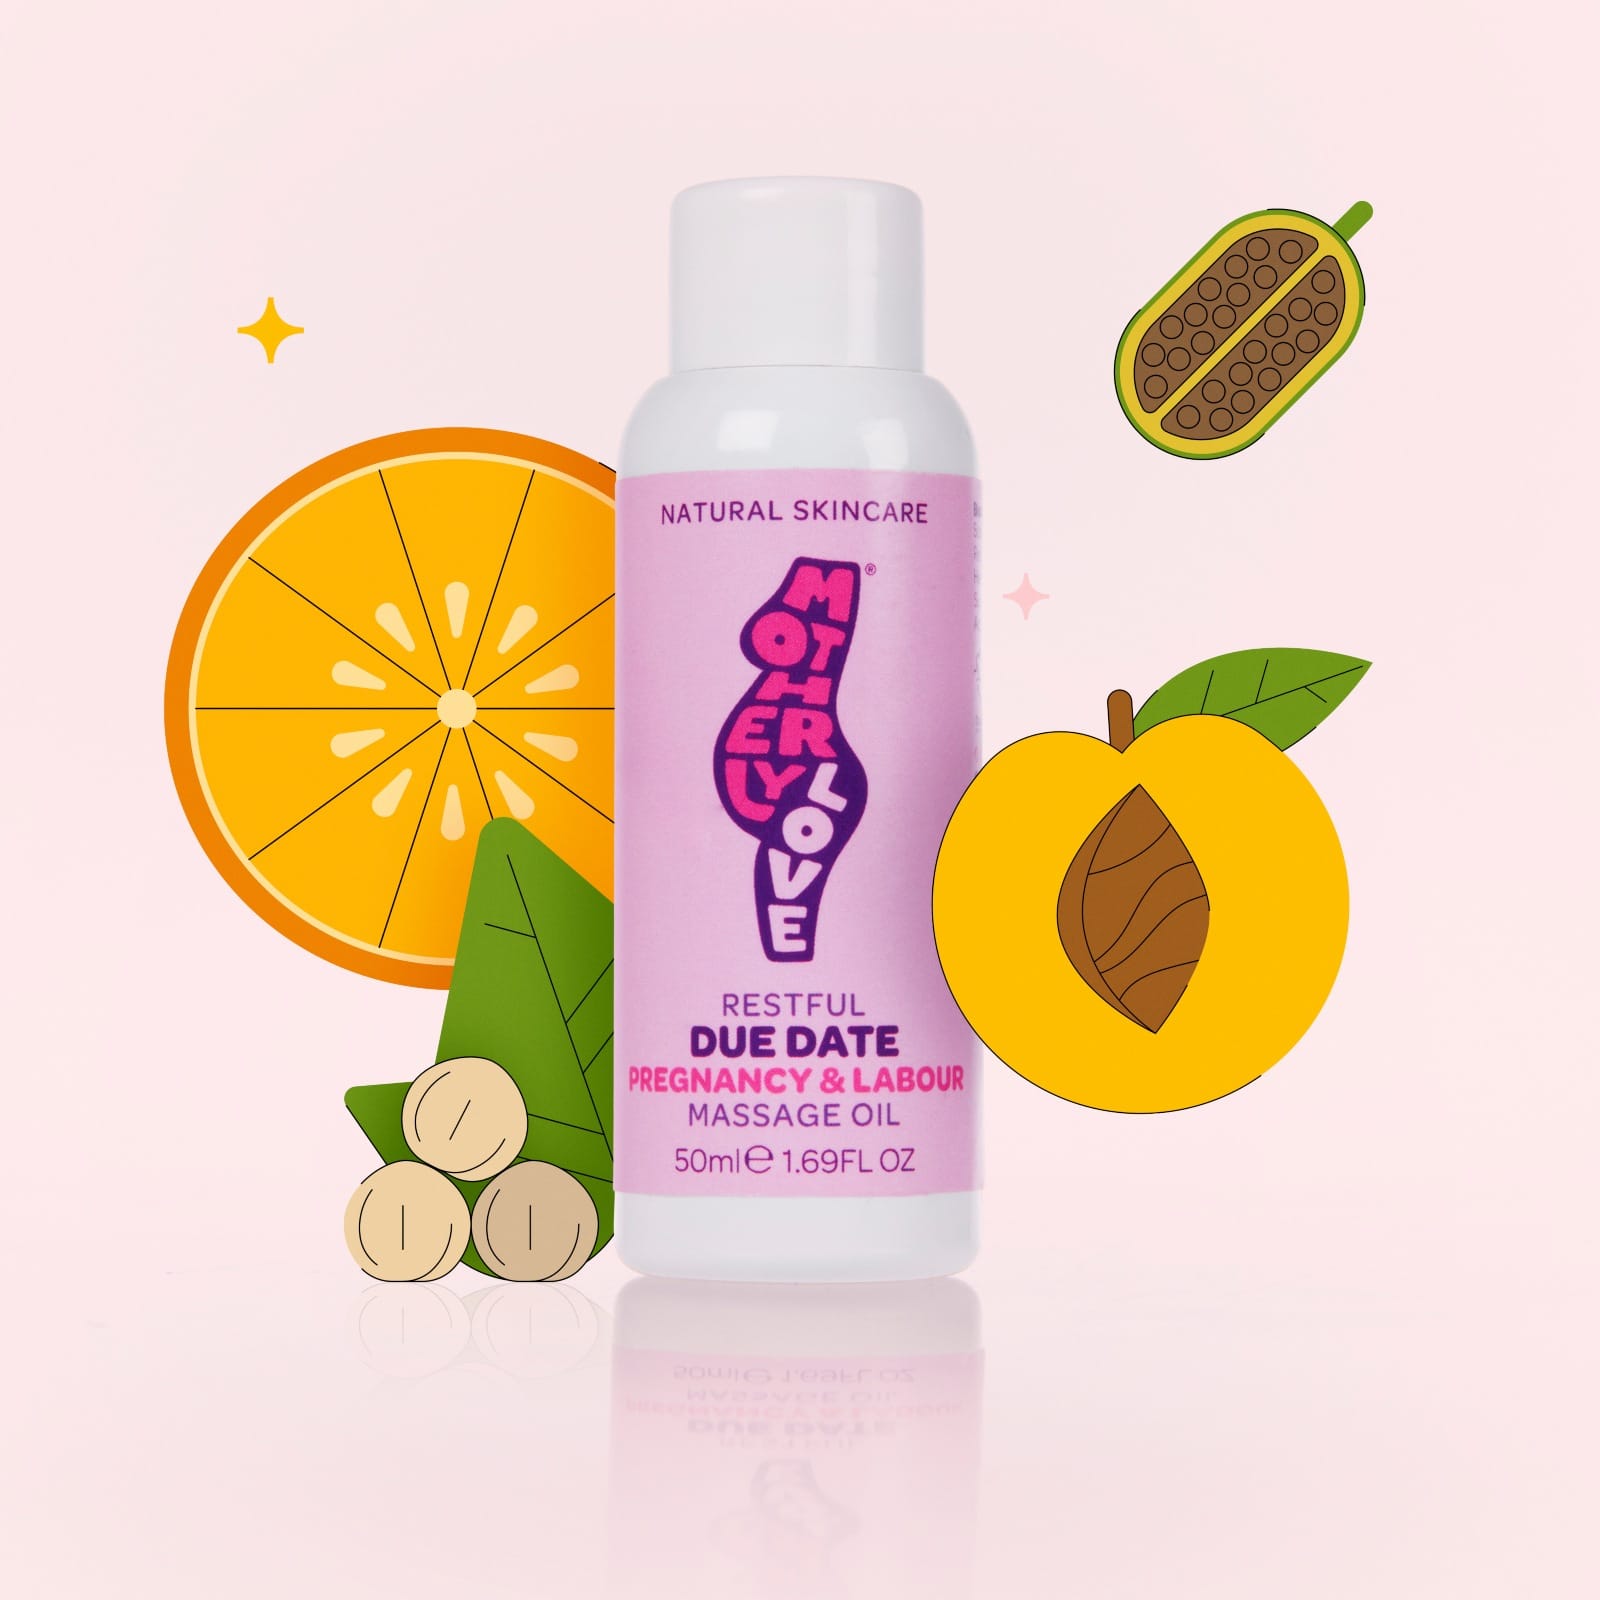 Award winning Due Date pregnancy and Labour Massage Oil